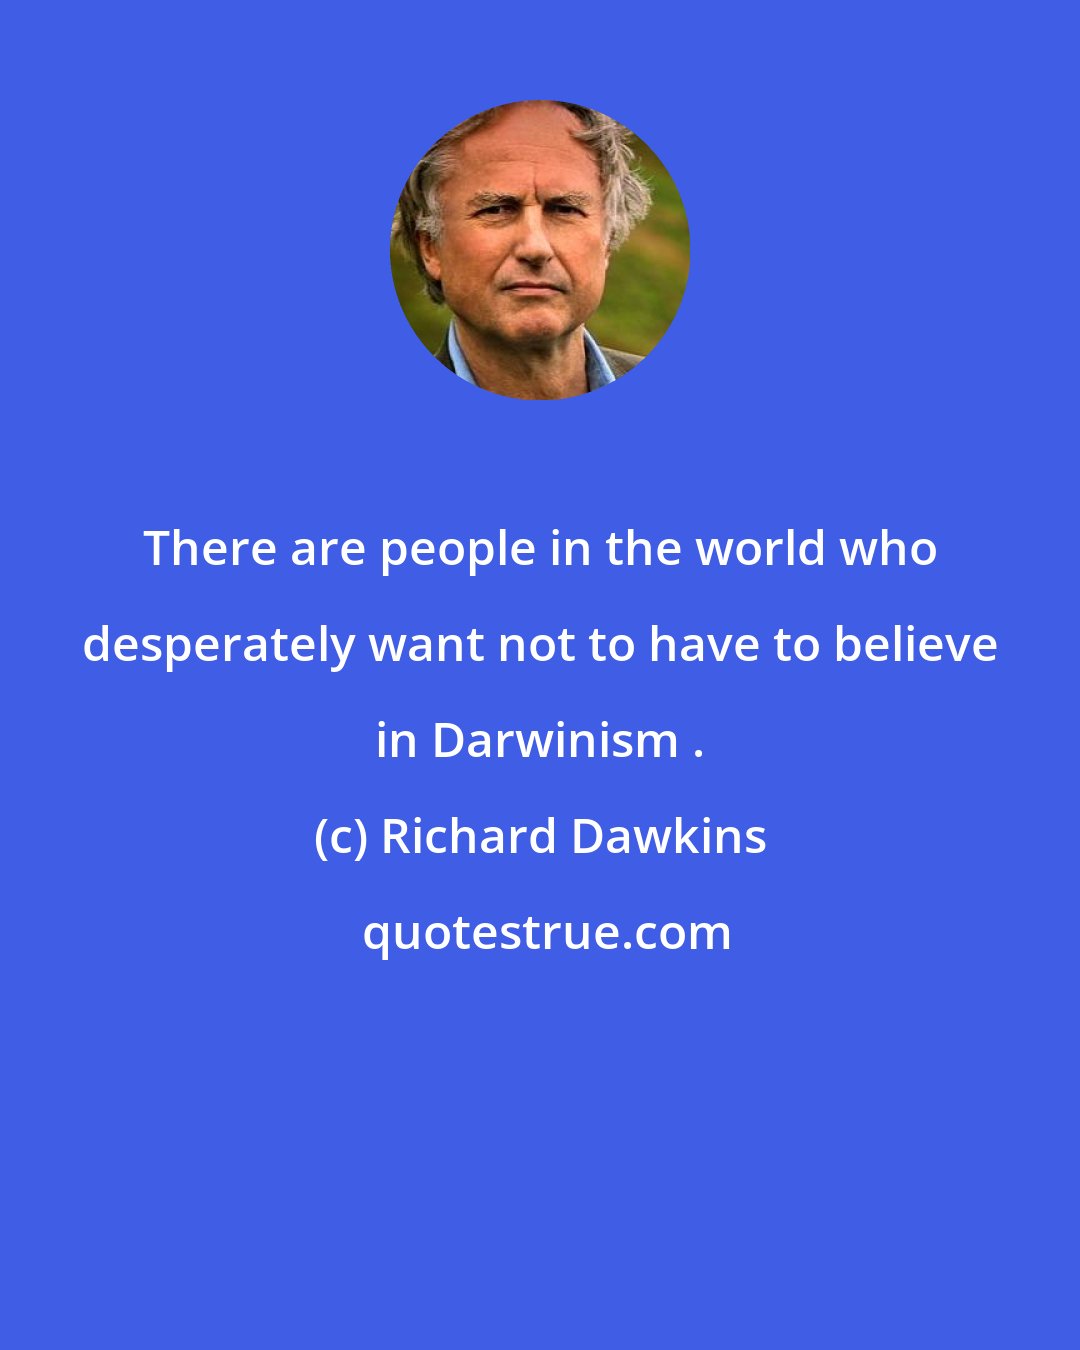 Richard Dawkins: There are people in the world who desperately want not to have to believe in Darwinism .